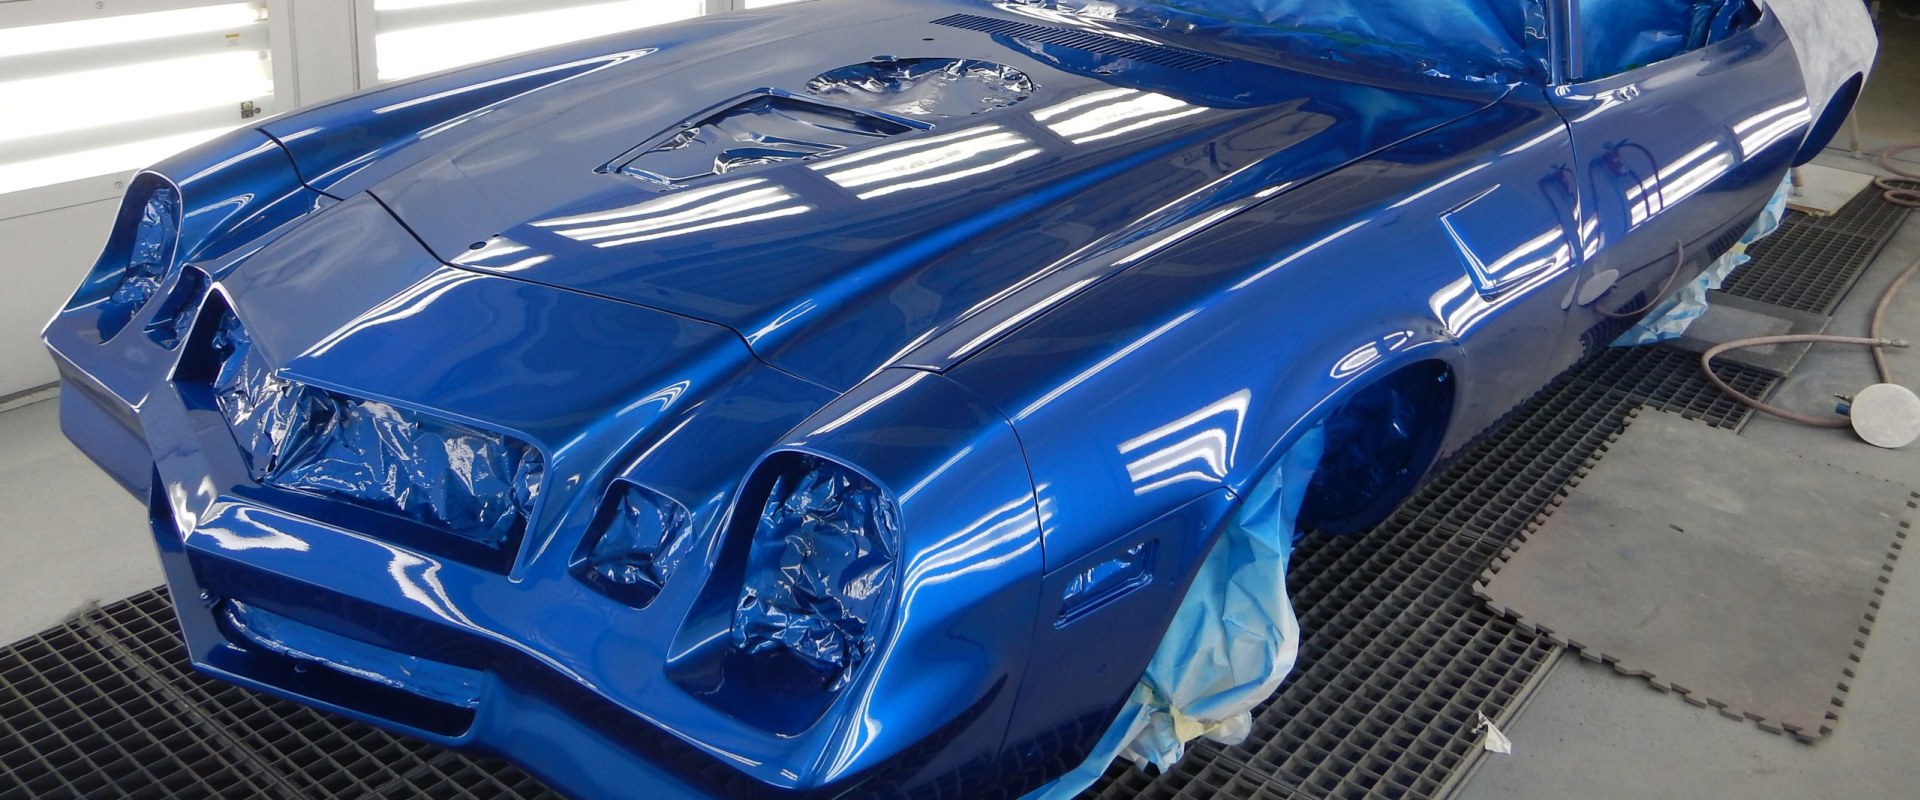 Custom Paint Jobs: Everything You Need to Know